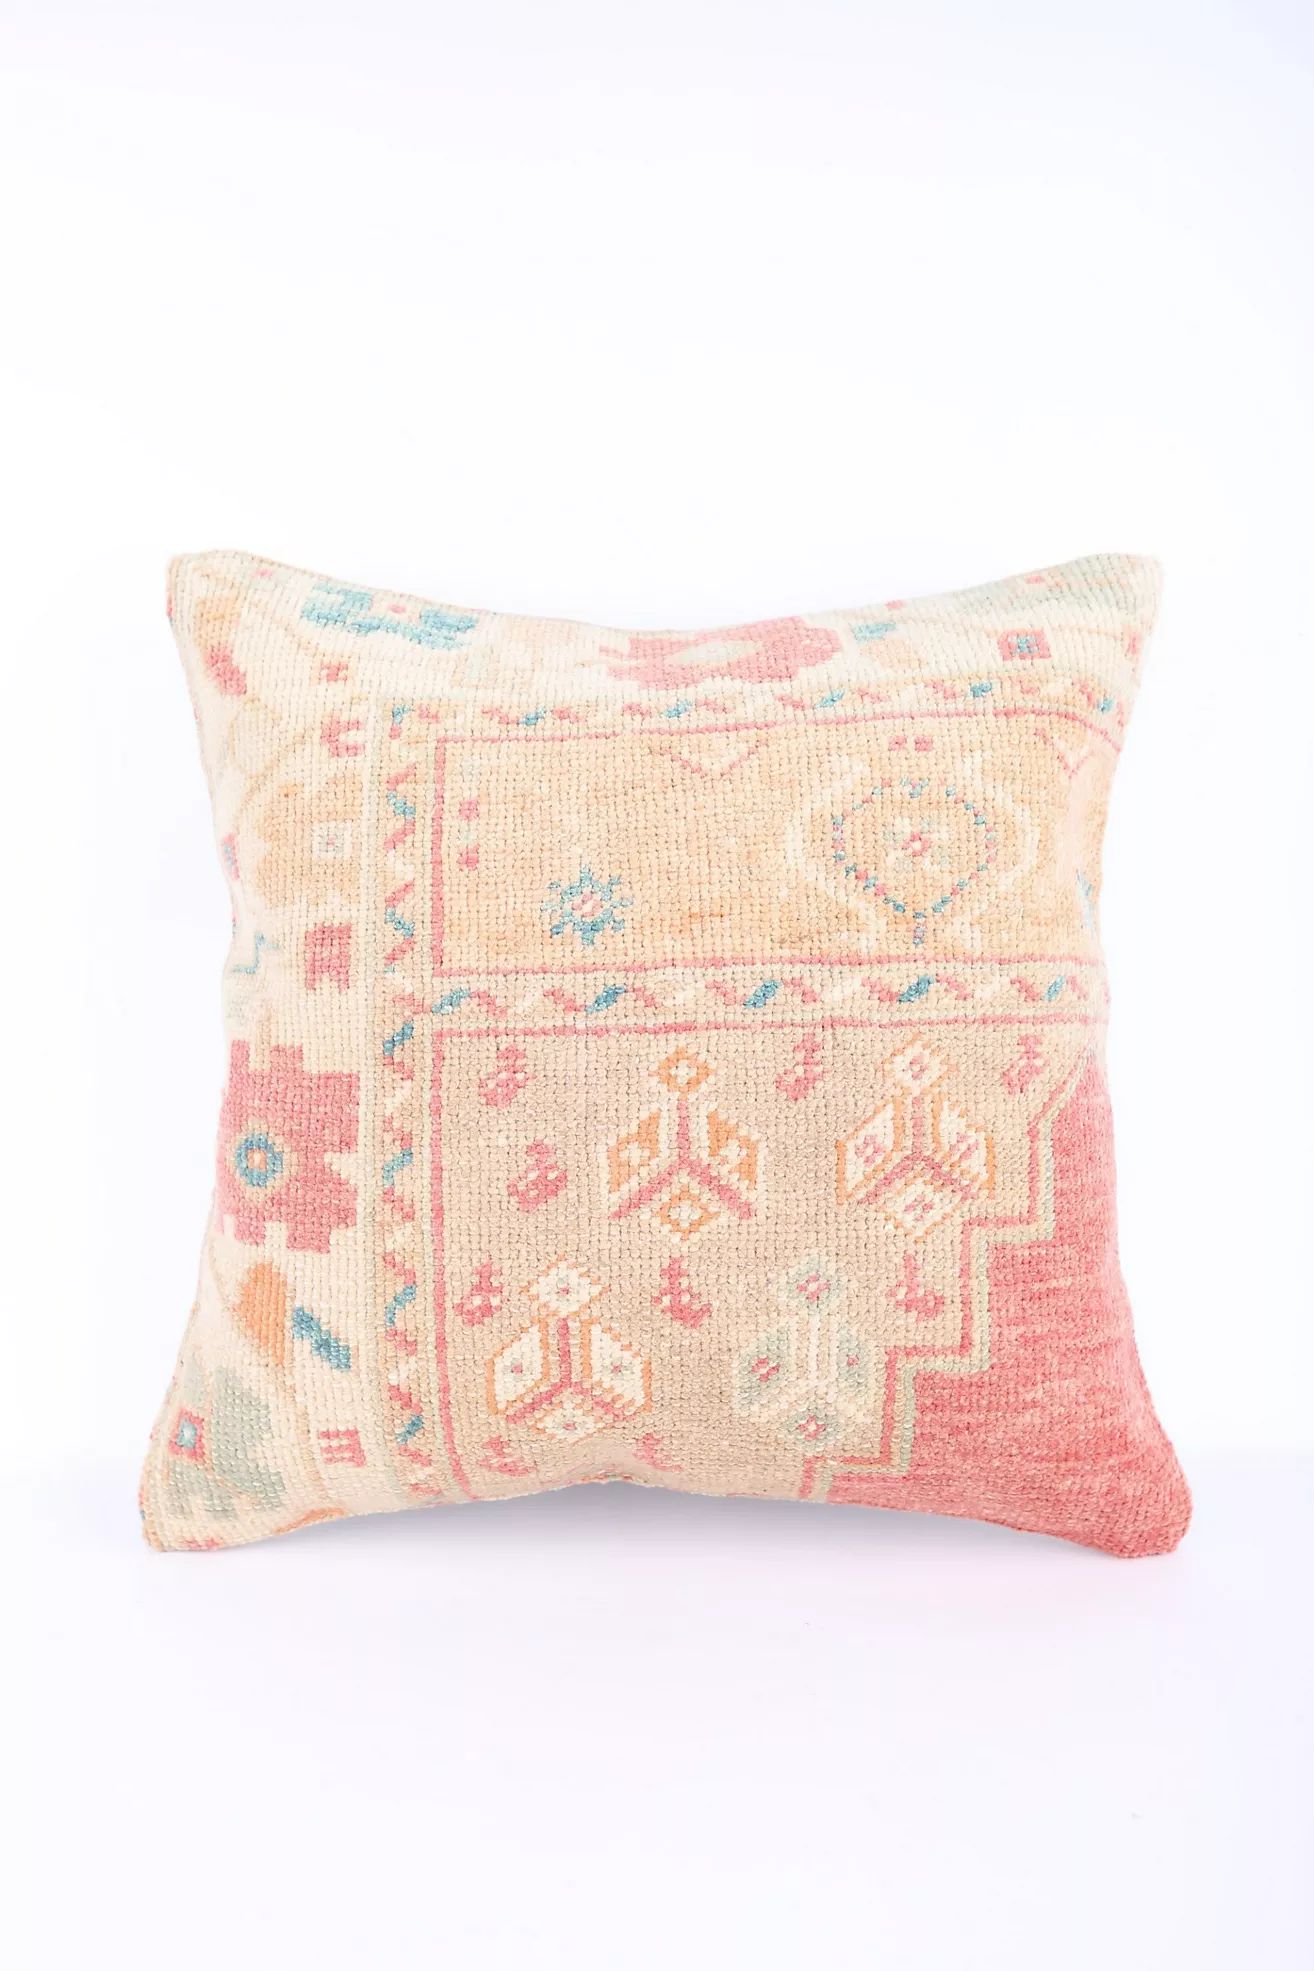 District Loom Pillow Cover No. 1199 | Anthropologie (US)